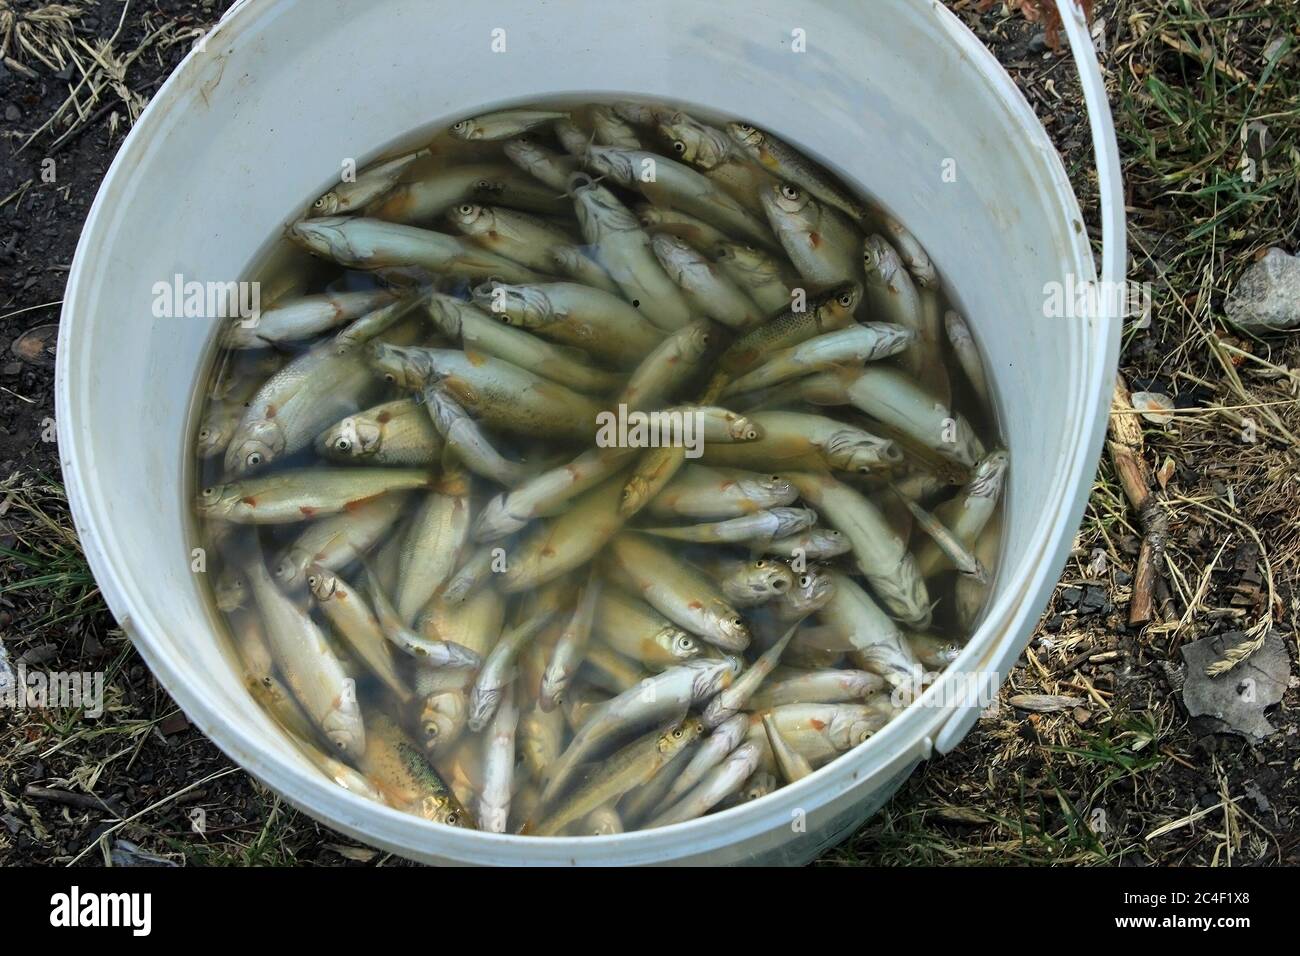 Full bucket of fish. Barbel caught in the river. River fish Stock Photo -  Alamy